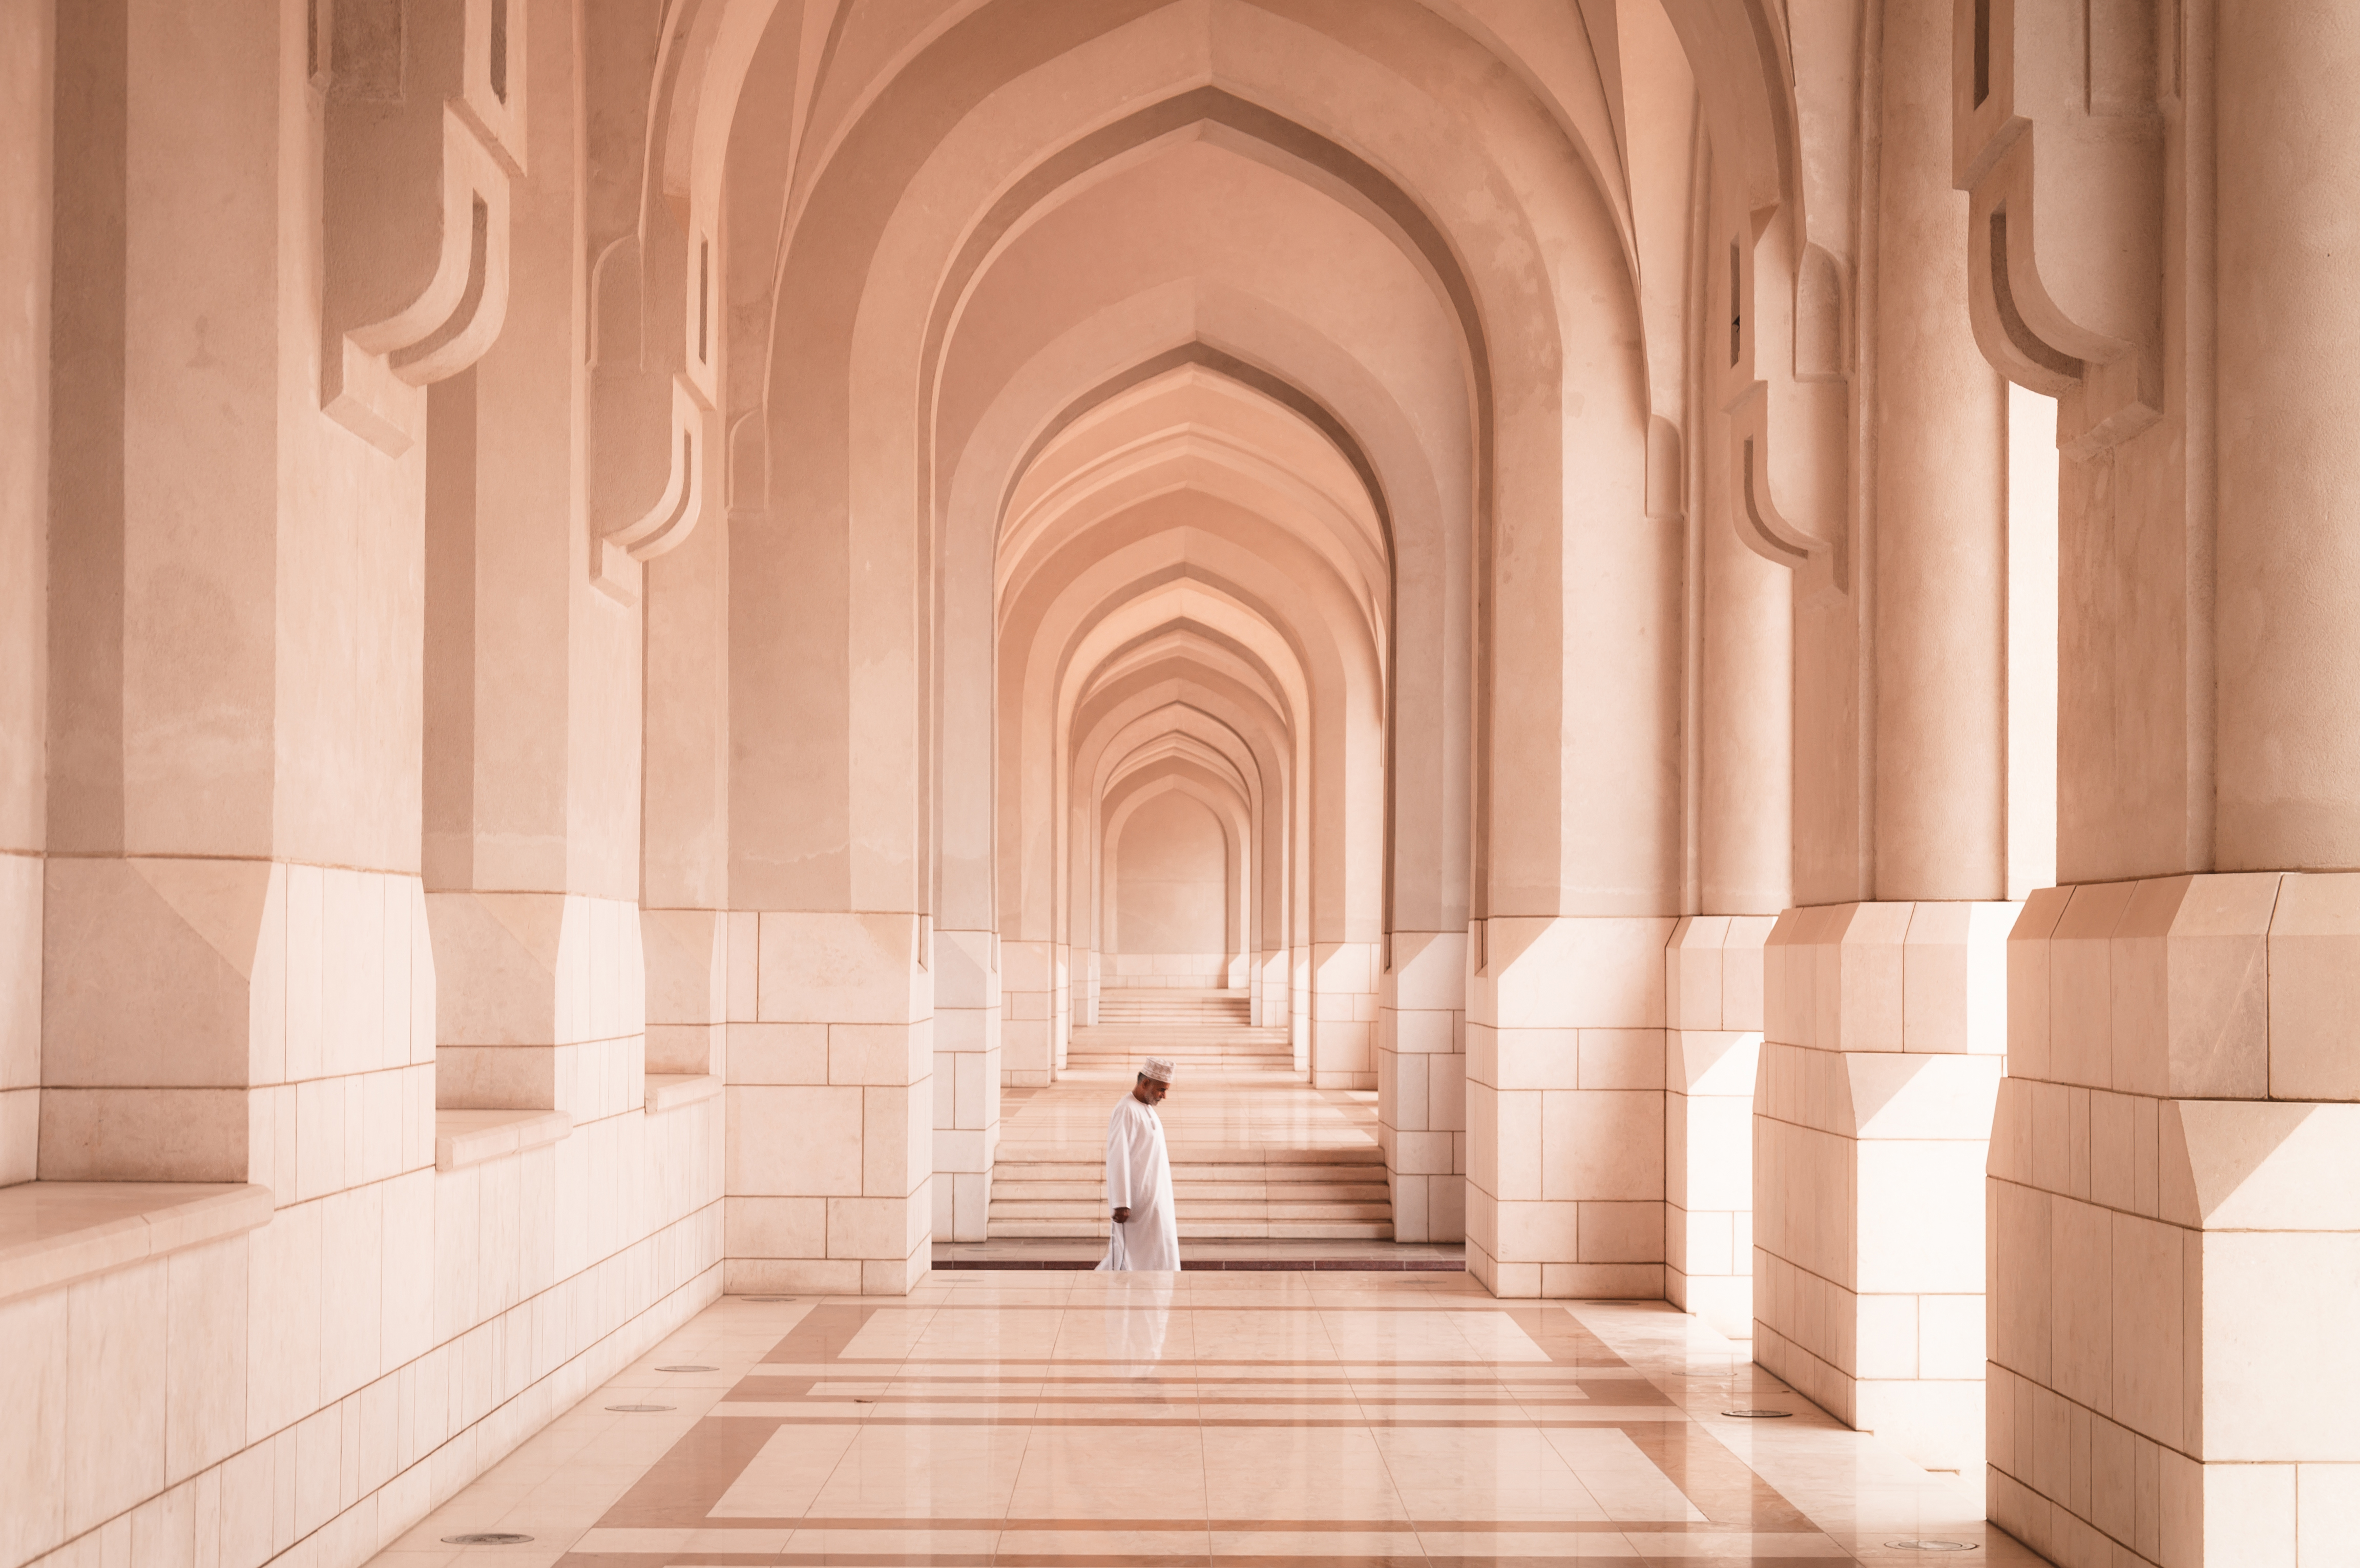 Man passing through arches of colonnade, Oman